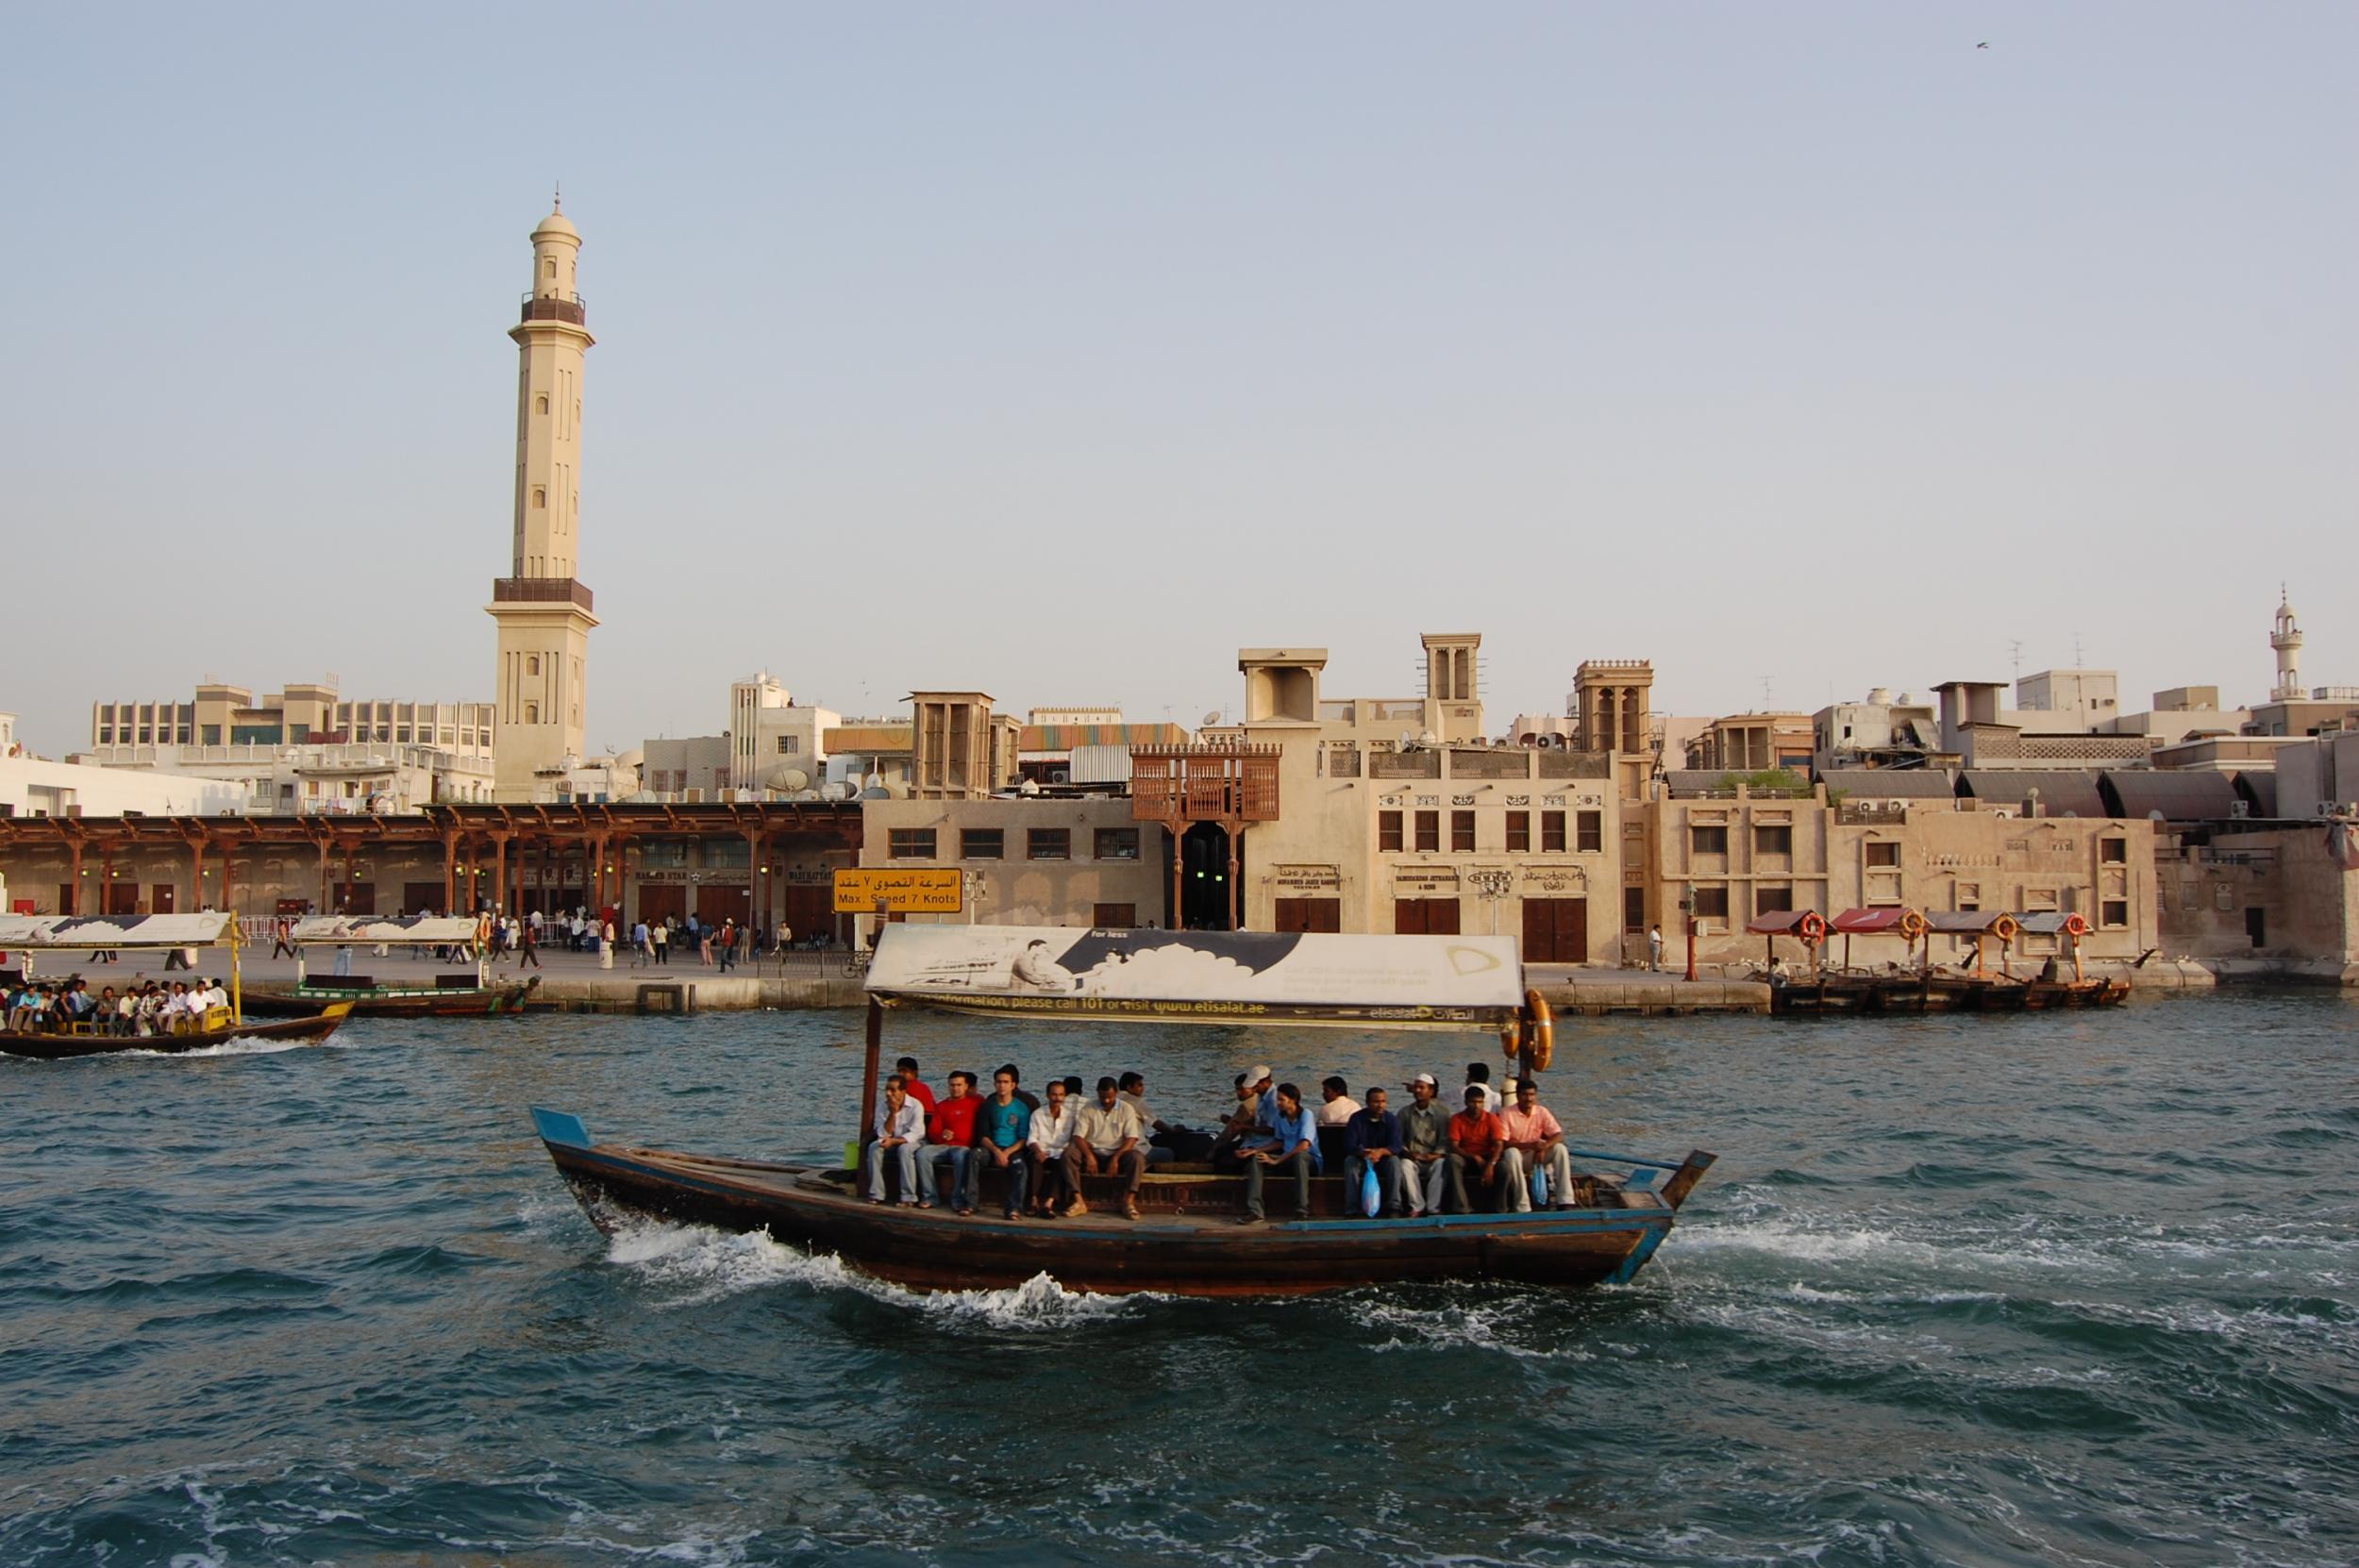 Experience the real Dubai on the creek – away from the city’s sparkling towers